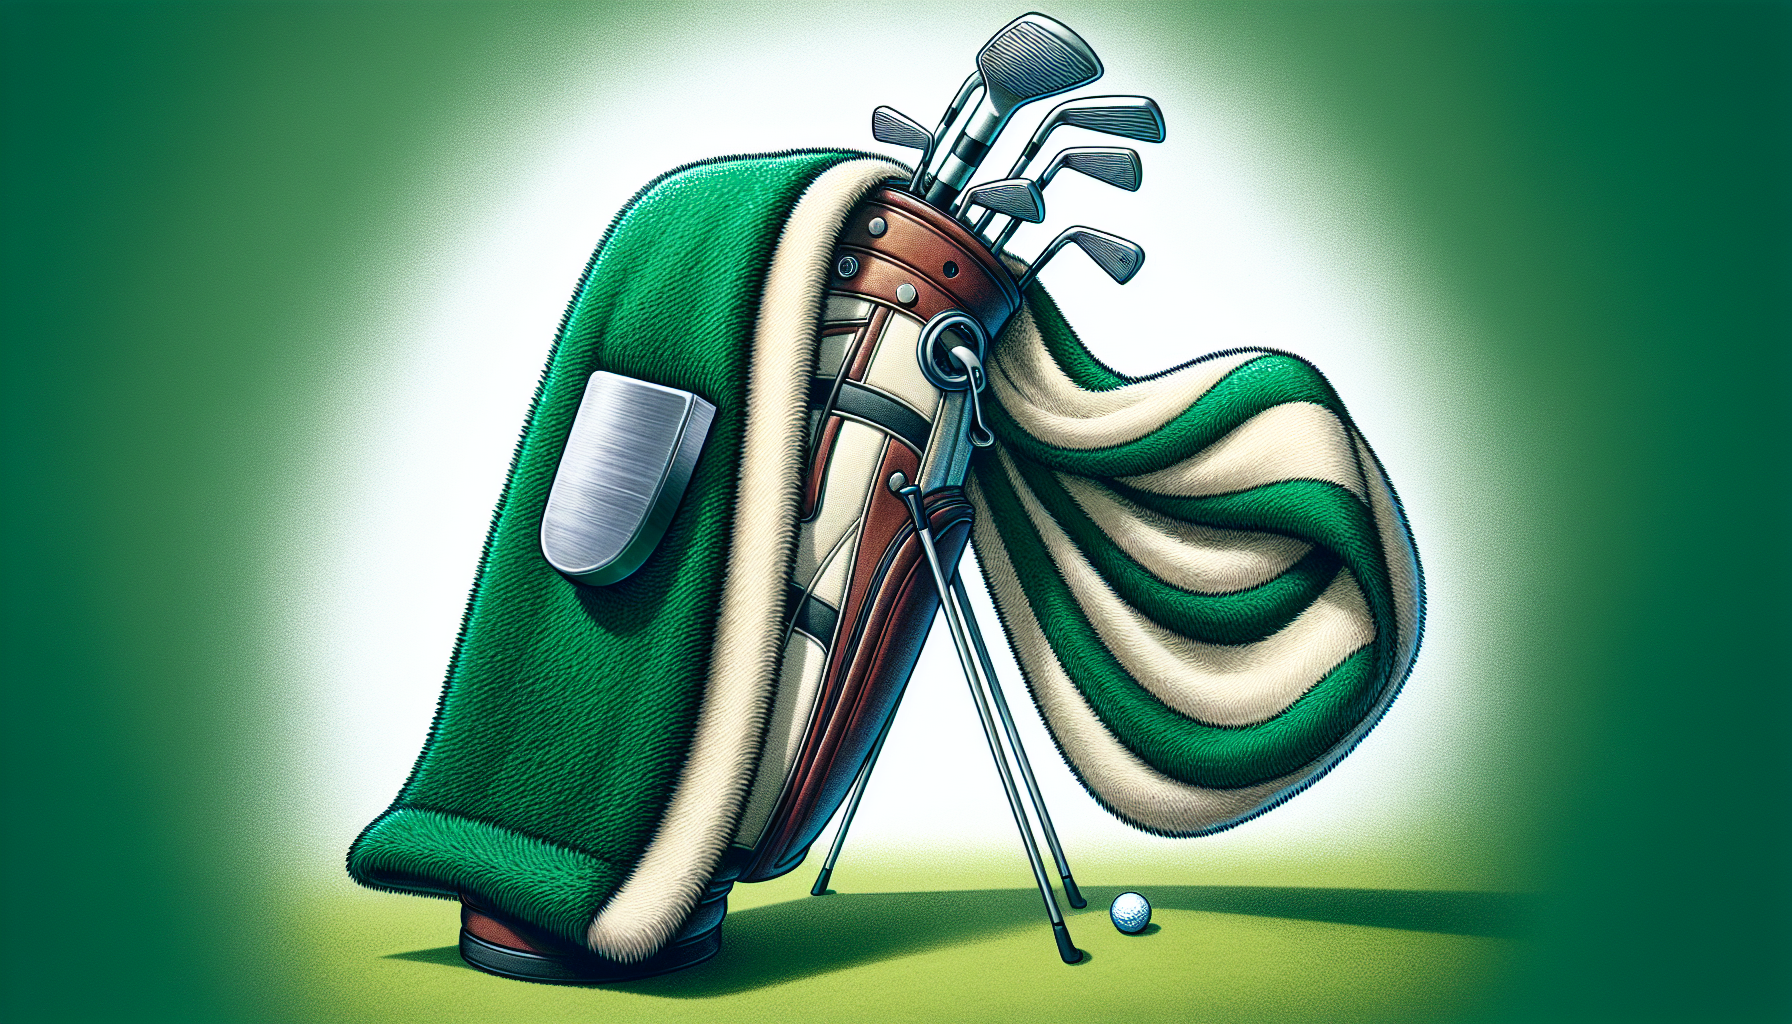 Illustration of a golf towel with a magnetic attachment